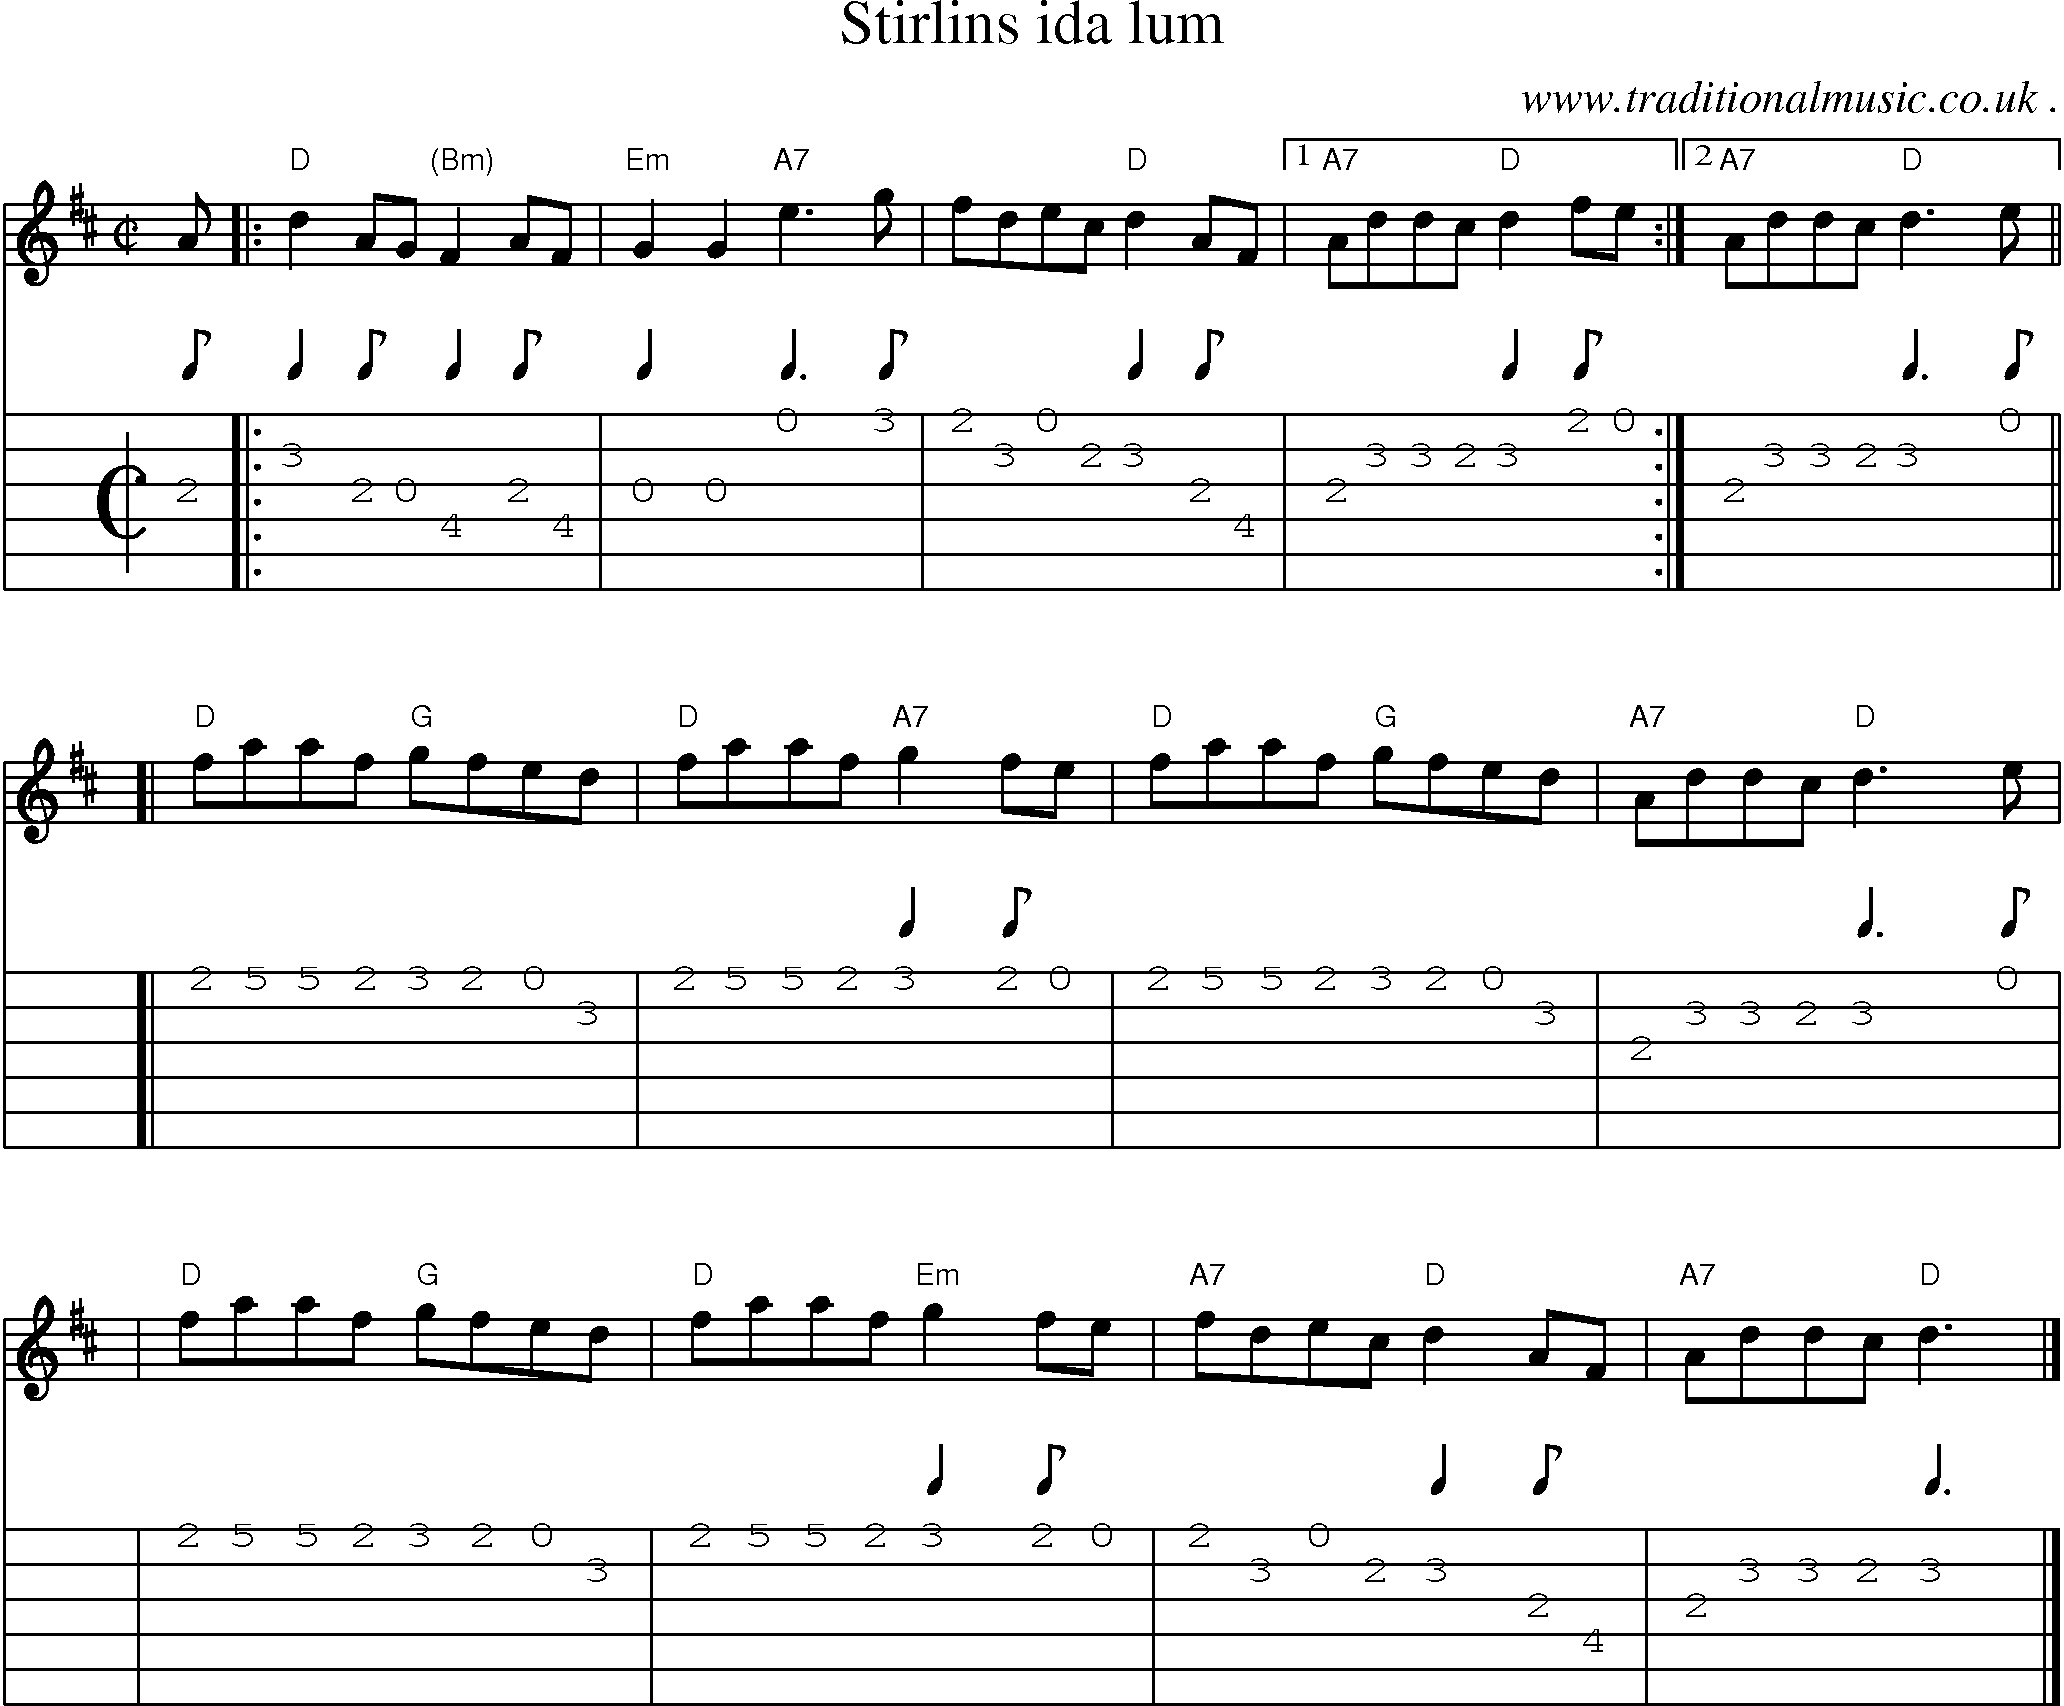 Sheet-music  score, Chords and Guitar Tabs for Stirlins Ida Lum